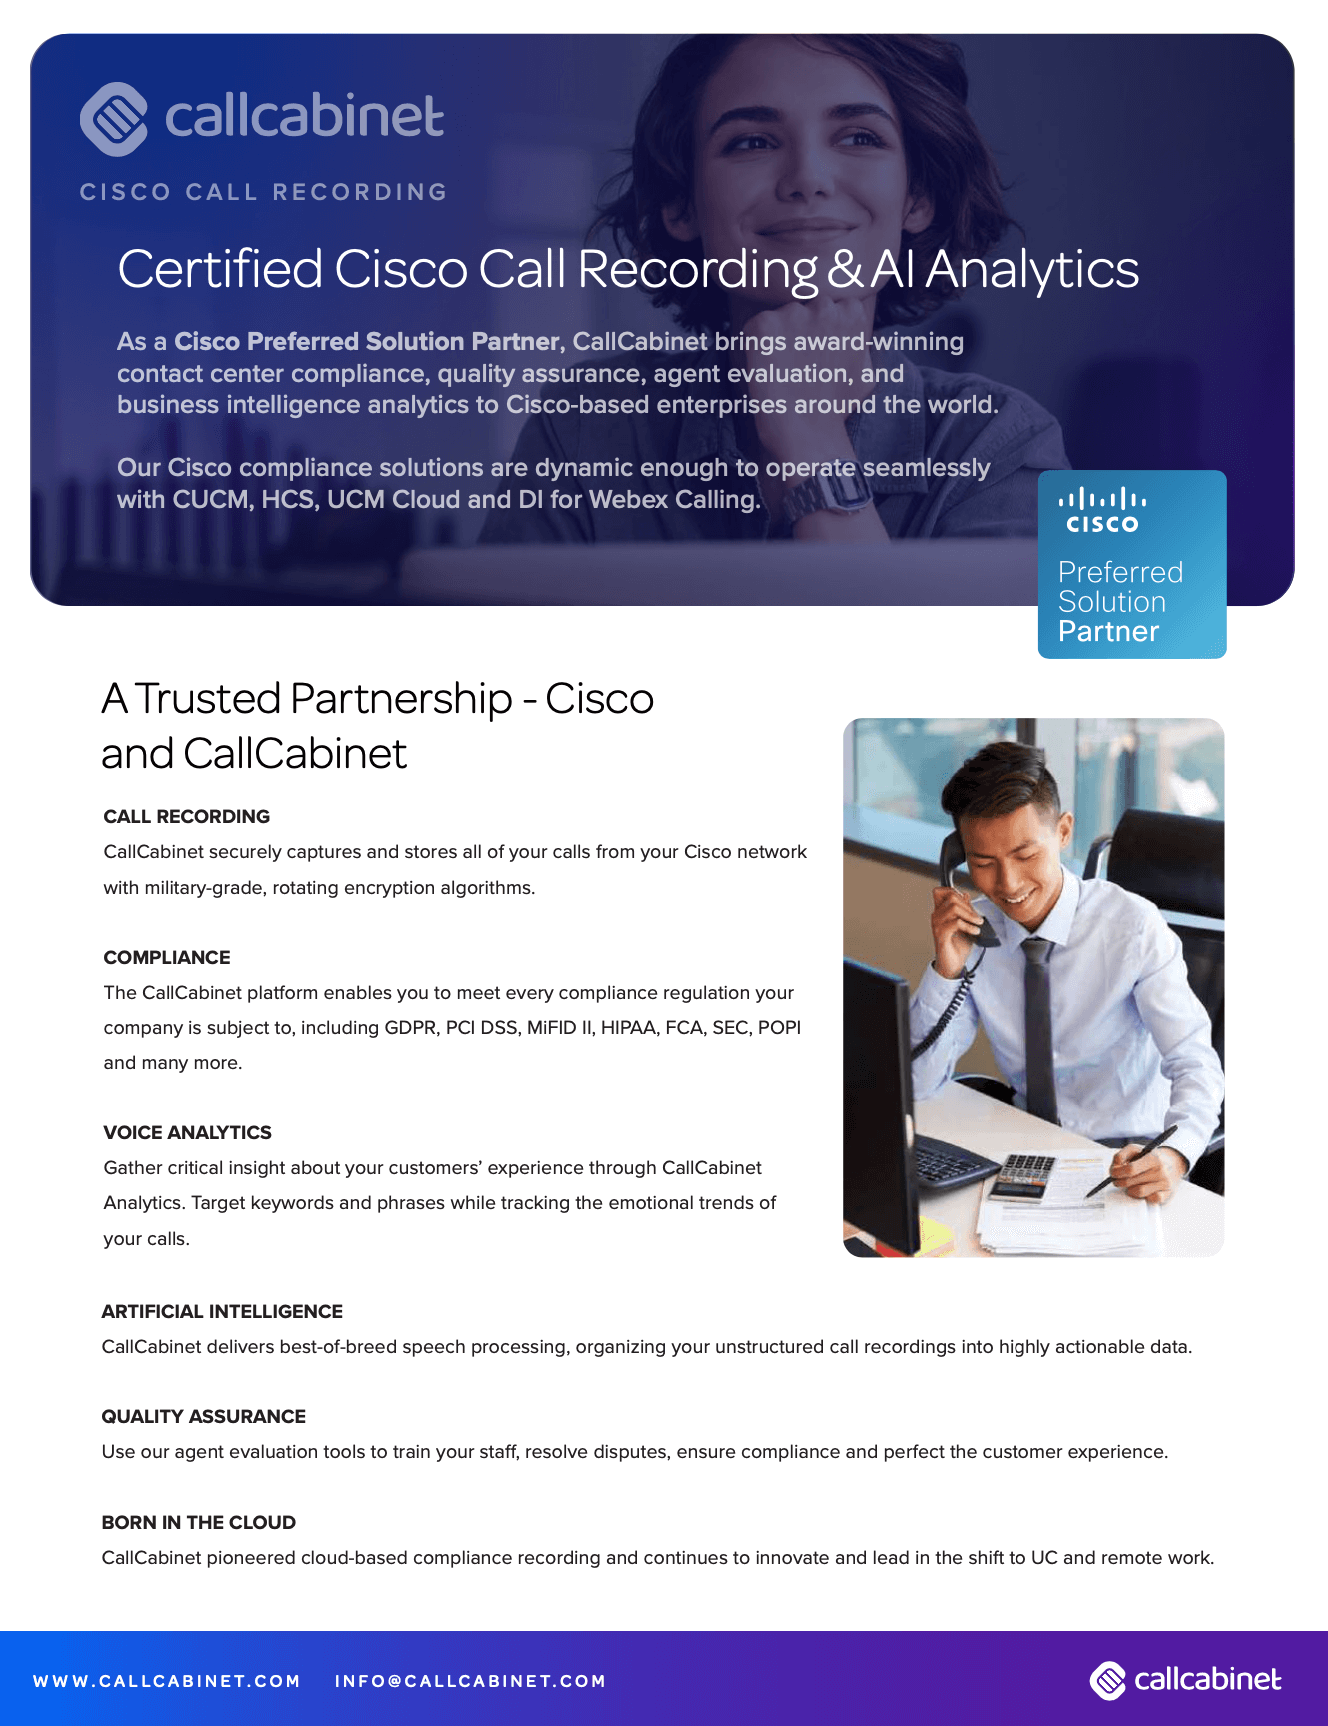 Certified cisco call recording and AI analytics